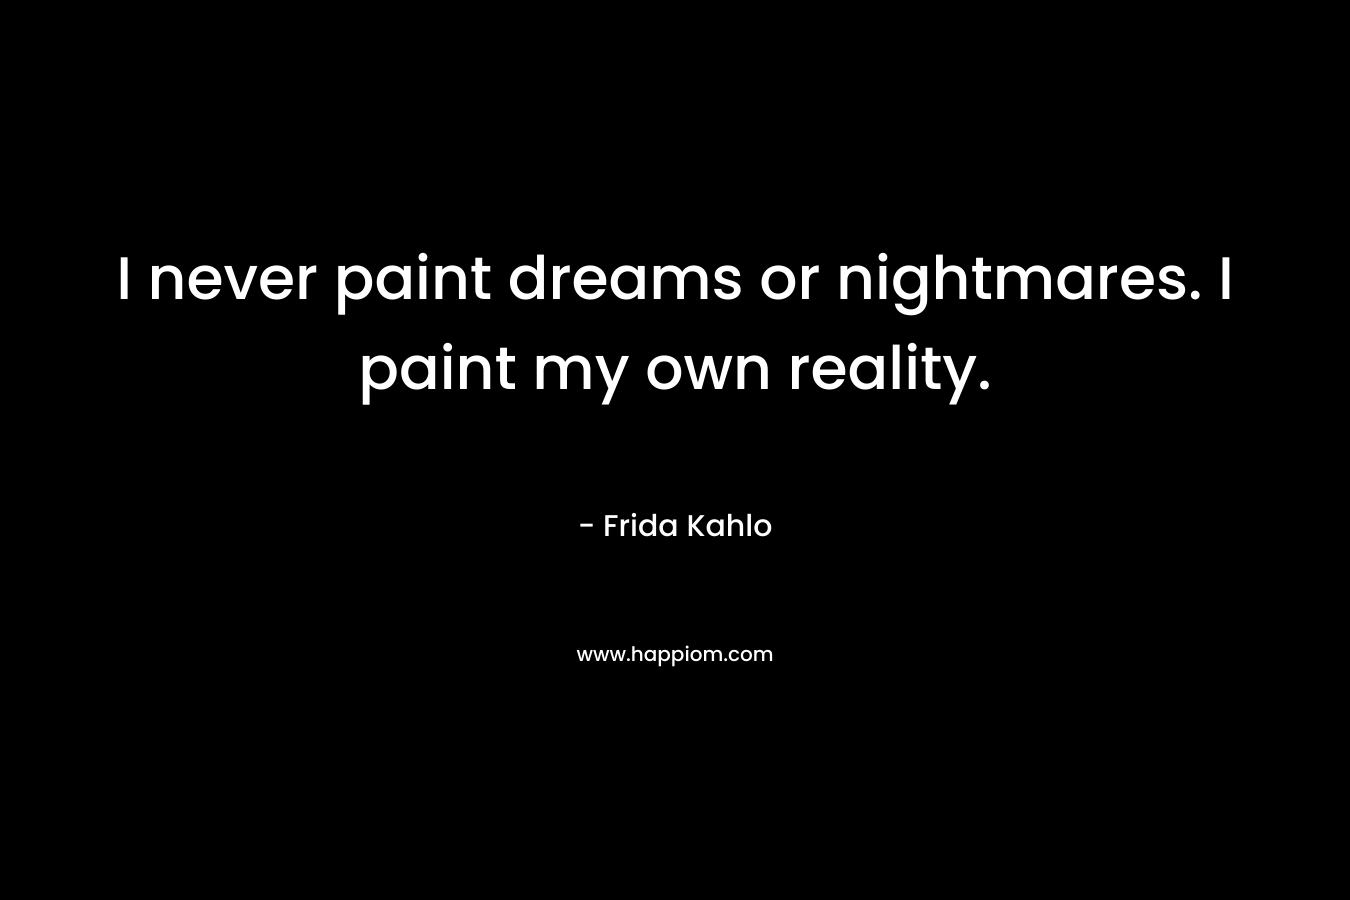 I never paint dreams or nightmares. I paint my own reality.